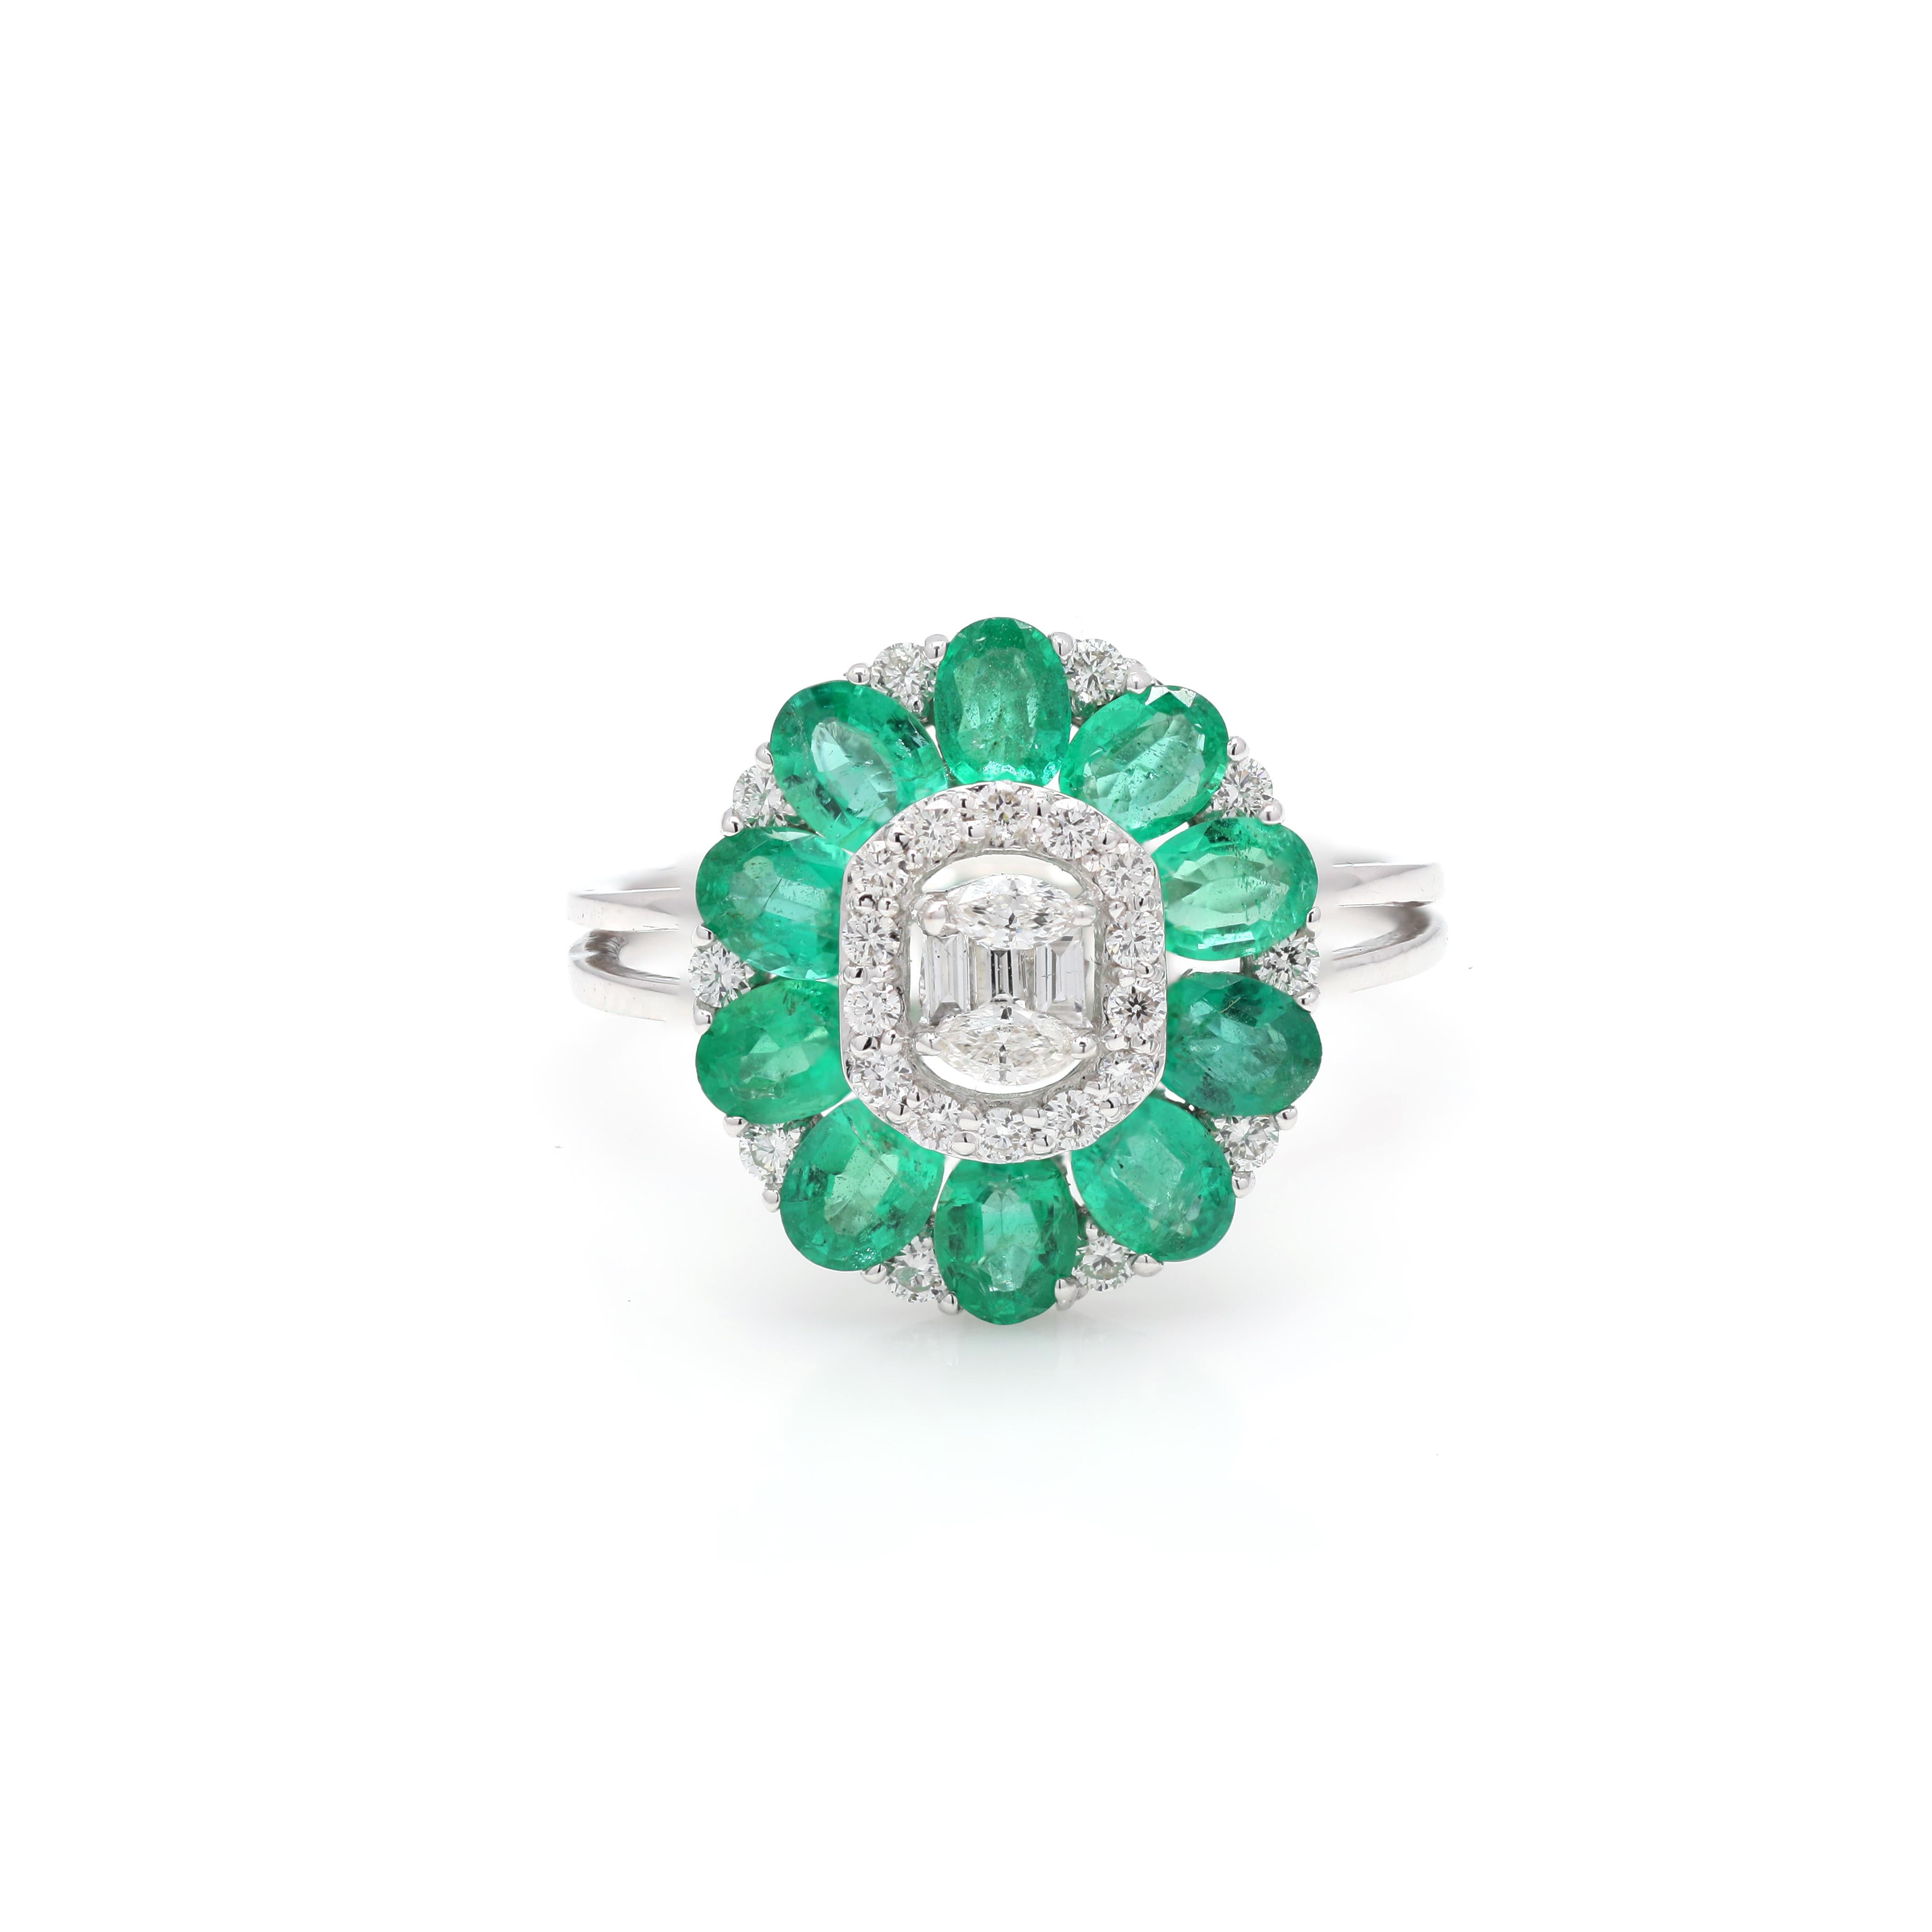 For Sale:  Fascinating Solid 18k White Gold Diamond and Emerald Statement Flower Ring 5